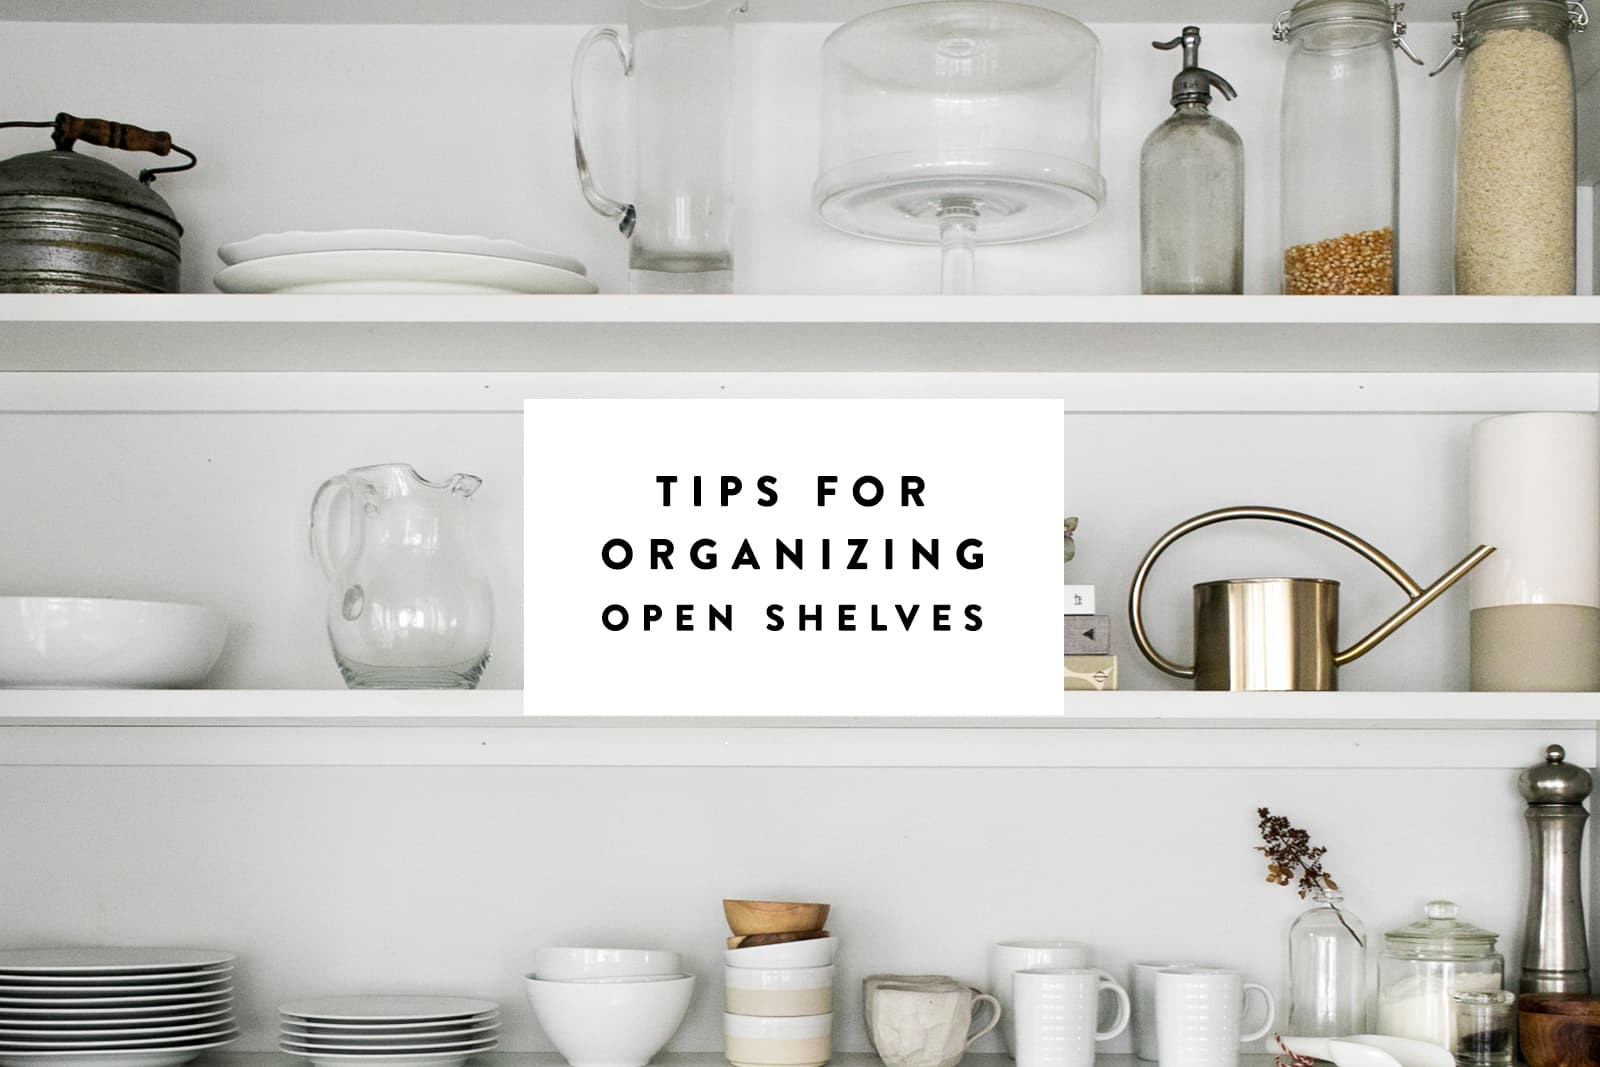 Open shelves can be a real hassle, but here are tips to help make them clean and easy to pull together and keep well styled. Get all the tips on The Fresh Exchange